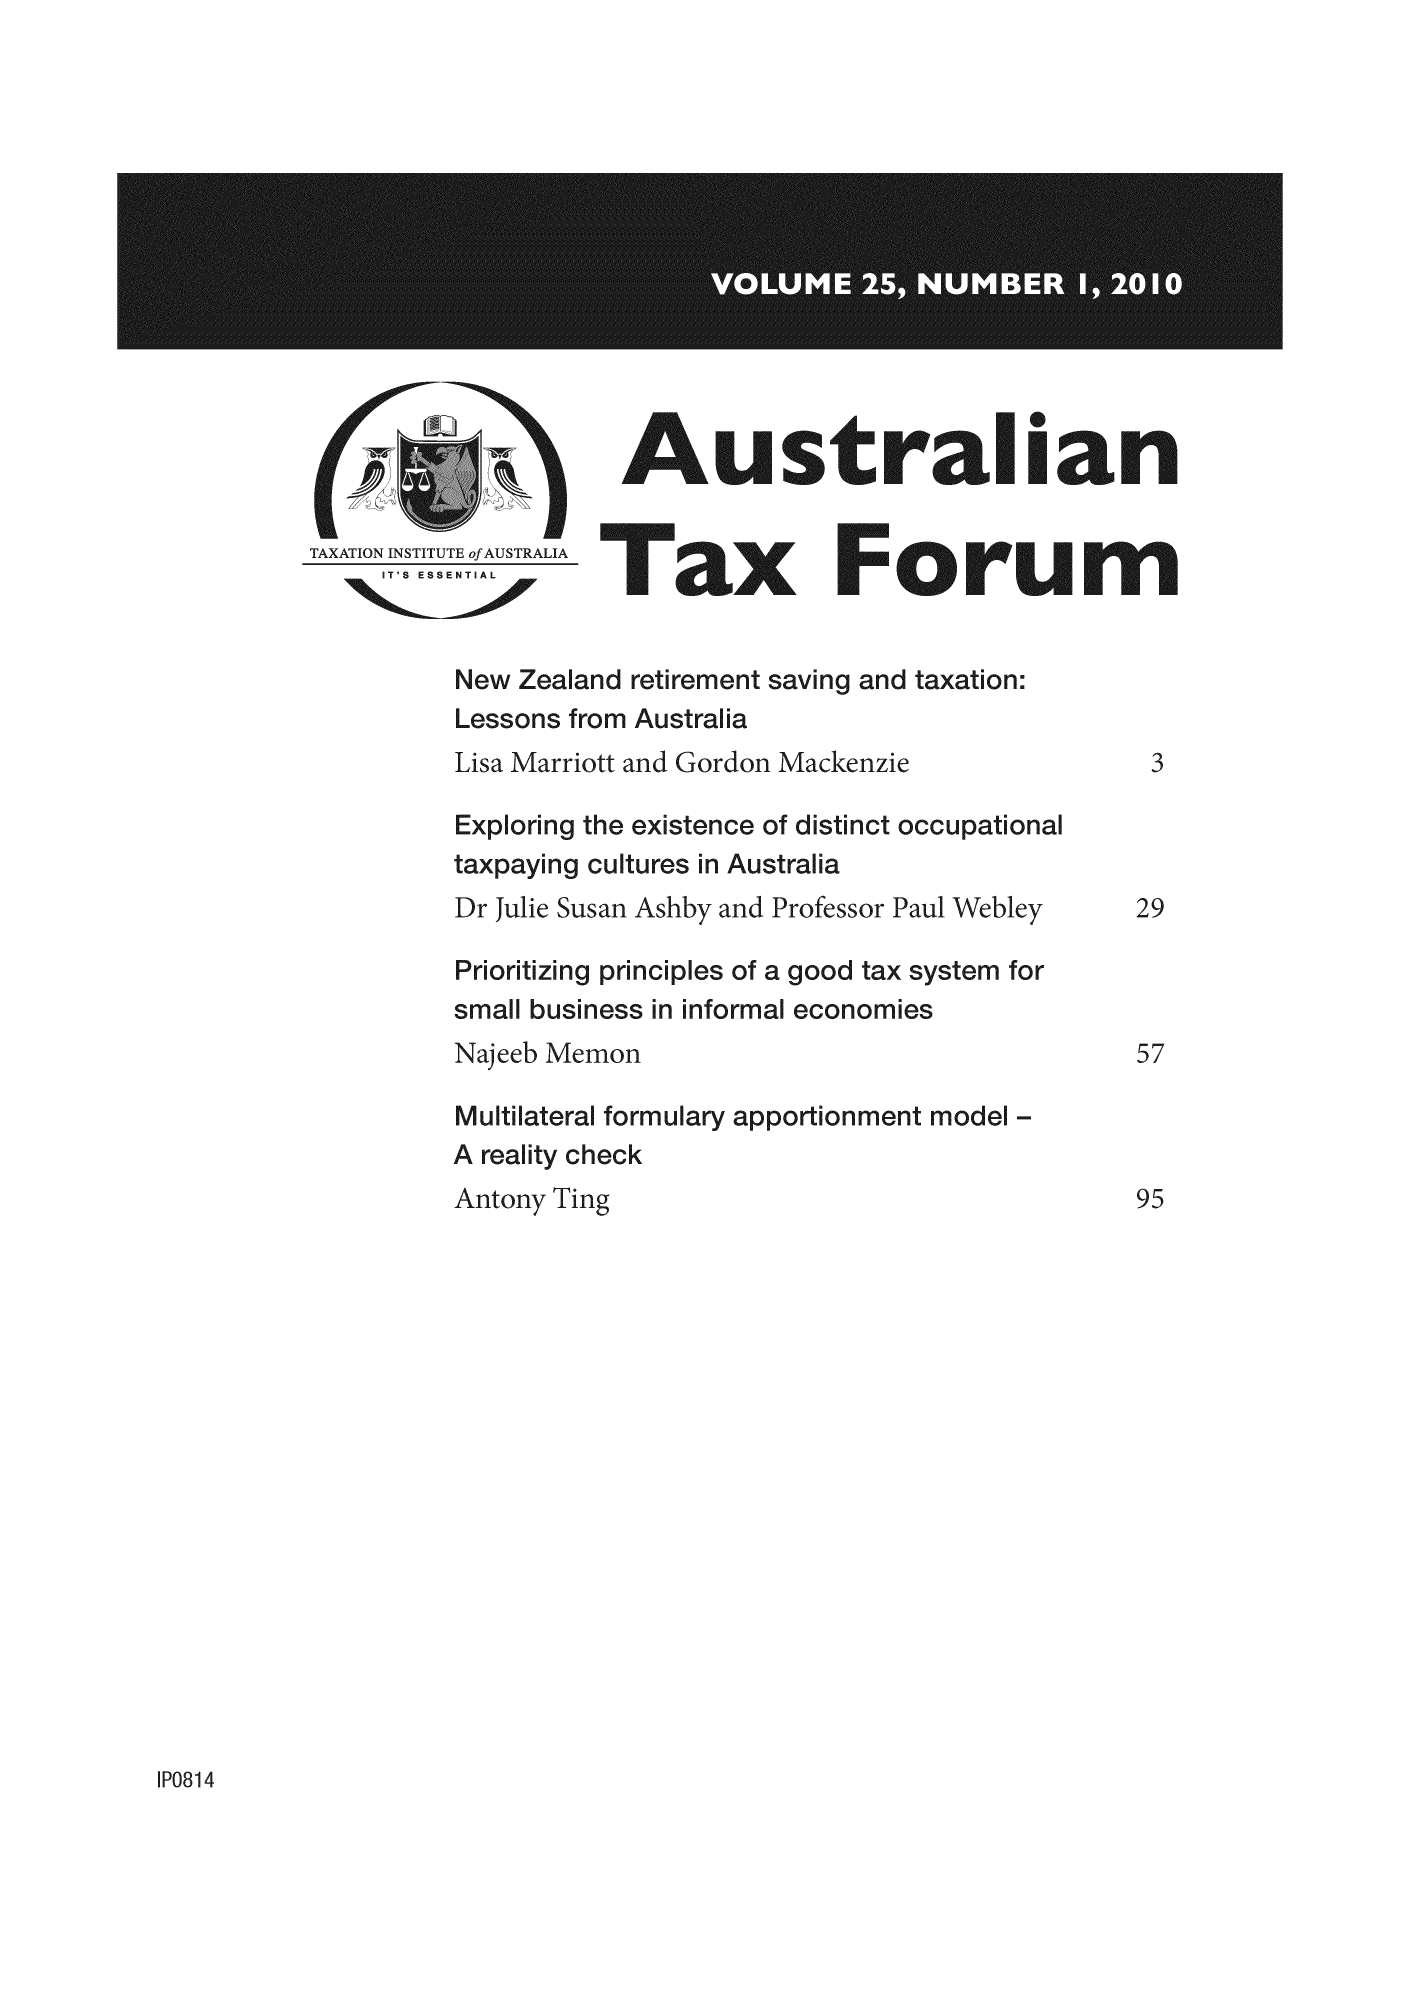 handle is hein.journals/austraxrum25 and id is 1 raw text is: Australian
Tax Forum

New Zealand retirement
Lessons from Australia
Lisa Marriott and Gordon
Exp oring the existence
taxpaying cultures in Au,
Dr Julie Susan Ashby and
Prior tizing principles of
sma business in nform

Naje<
Multi
A rec

an taxat on

Ma
f di

Professi
good
econ<

.upa

r Paul We
ax syster
)mies

de

ateral ft
ity chet
a y Ting

lulary apportionment mode

9


